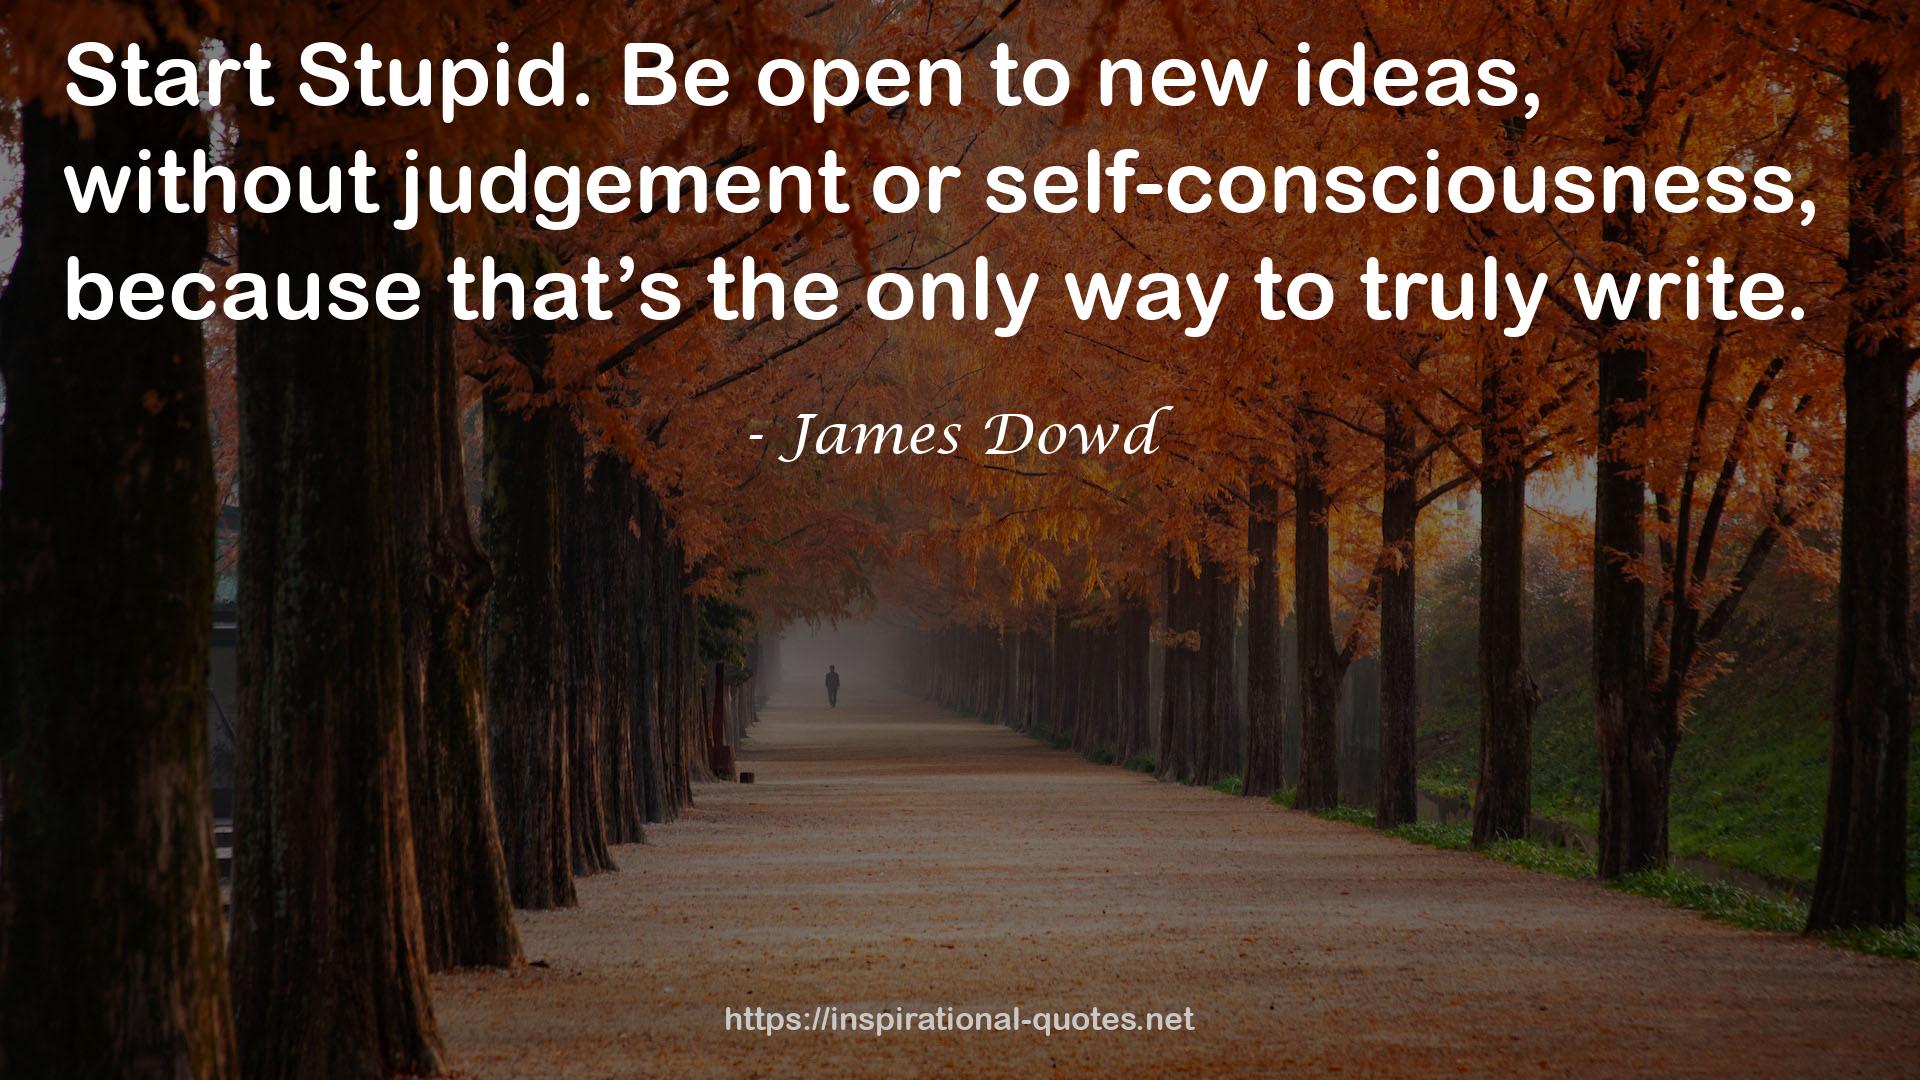 James Dowd QUOTES